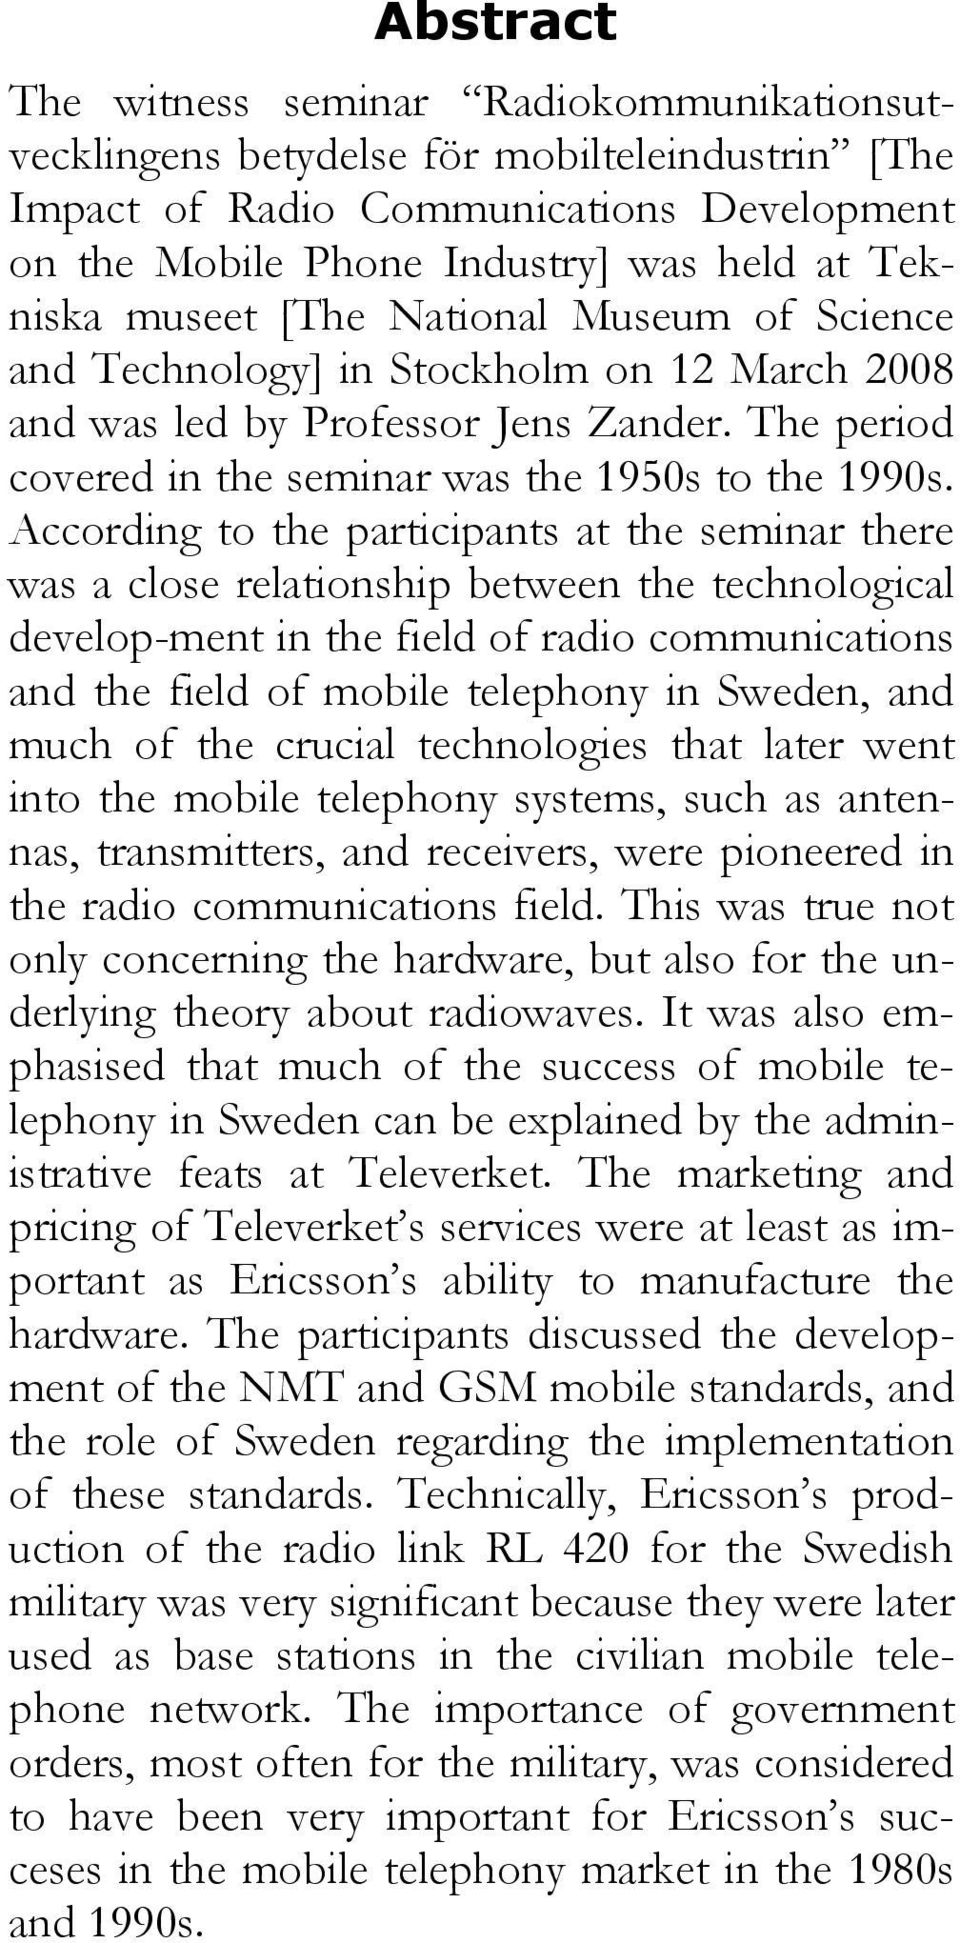 According to the participants at the seminar there was a close relationship between the technological develop-ment in the field of radio communications and the field of mobile telephony in Sweden,